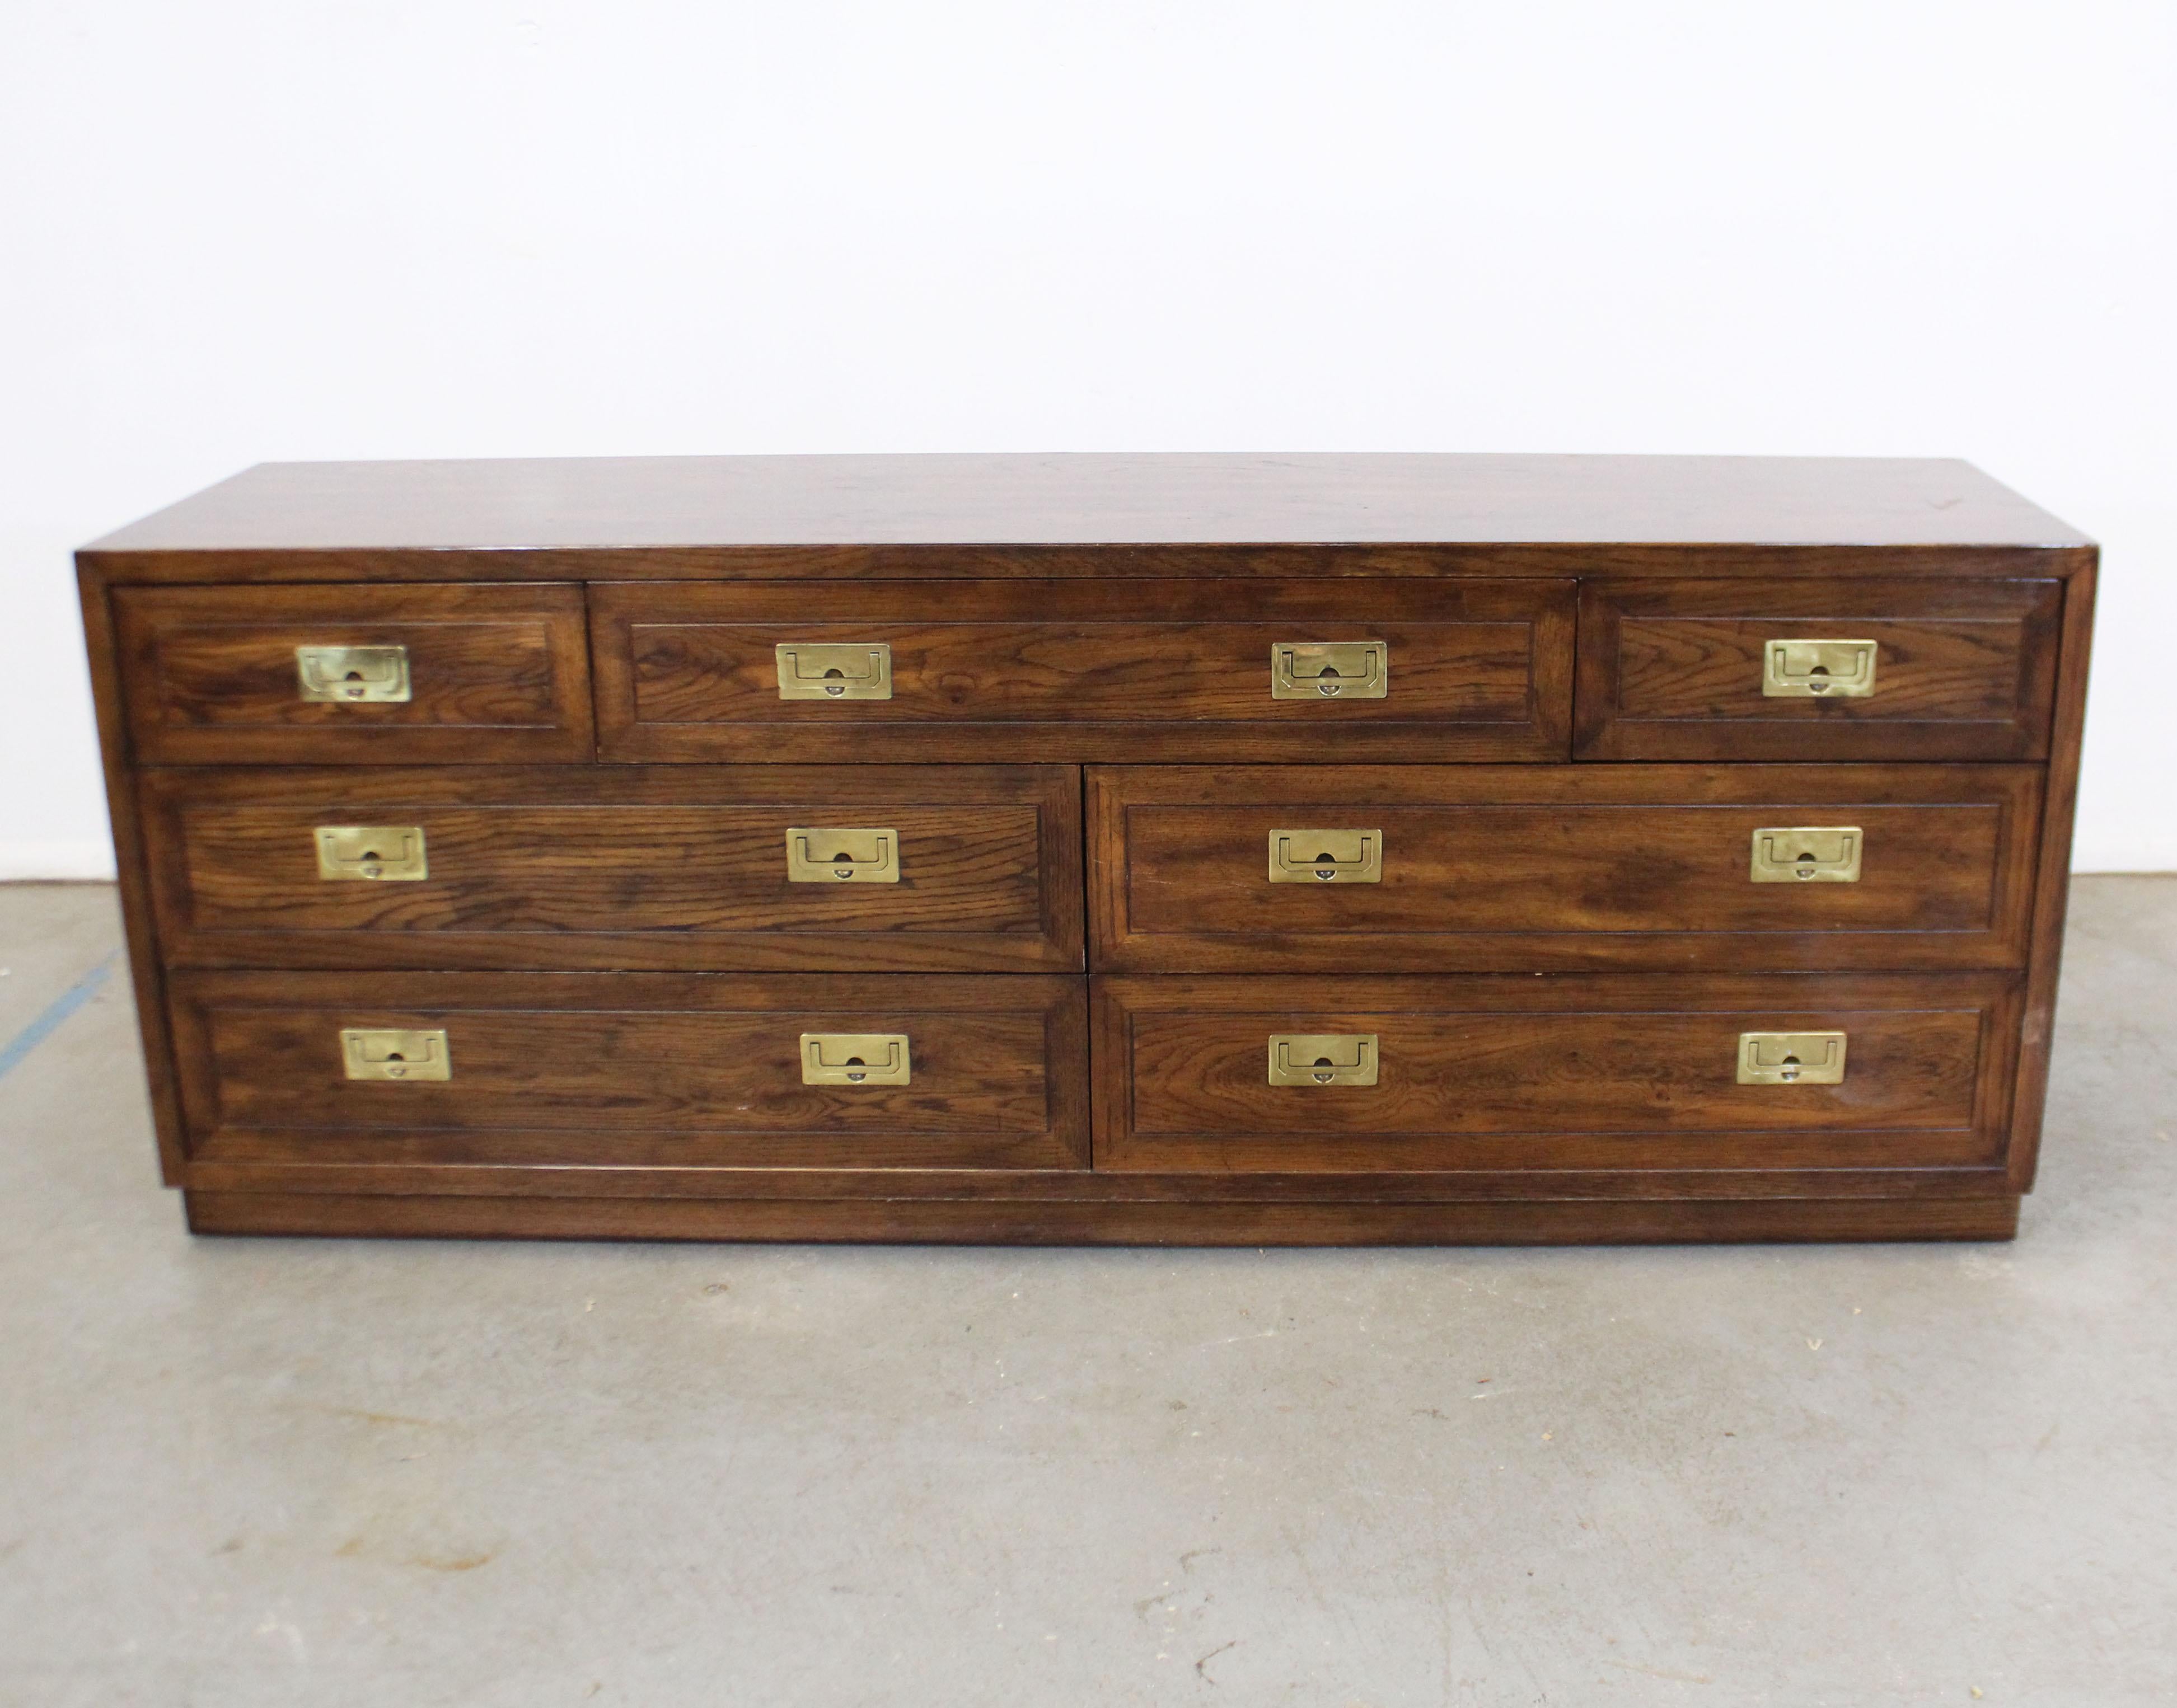 Offered is a vintage Campaign oak dresser with brass accents made by Henredon. This is a solid dresser with nine dovetailed drawers. Three drawers have removable dividers. It is in good condition, with some age wear including edge wear, scratches,